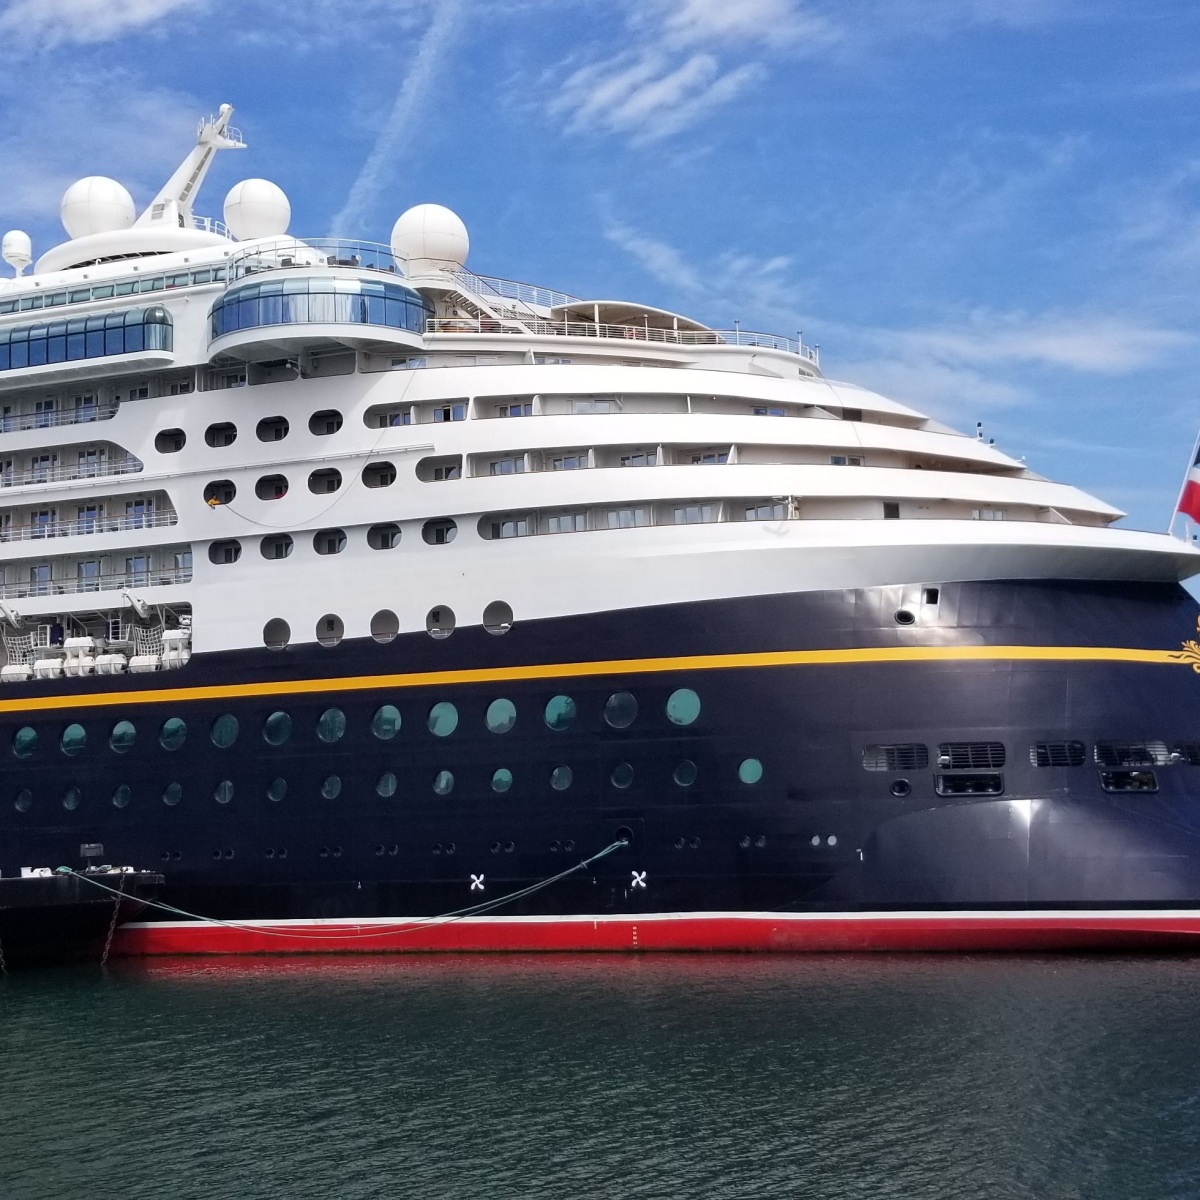 6 Tips for your Disney Cruise!